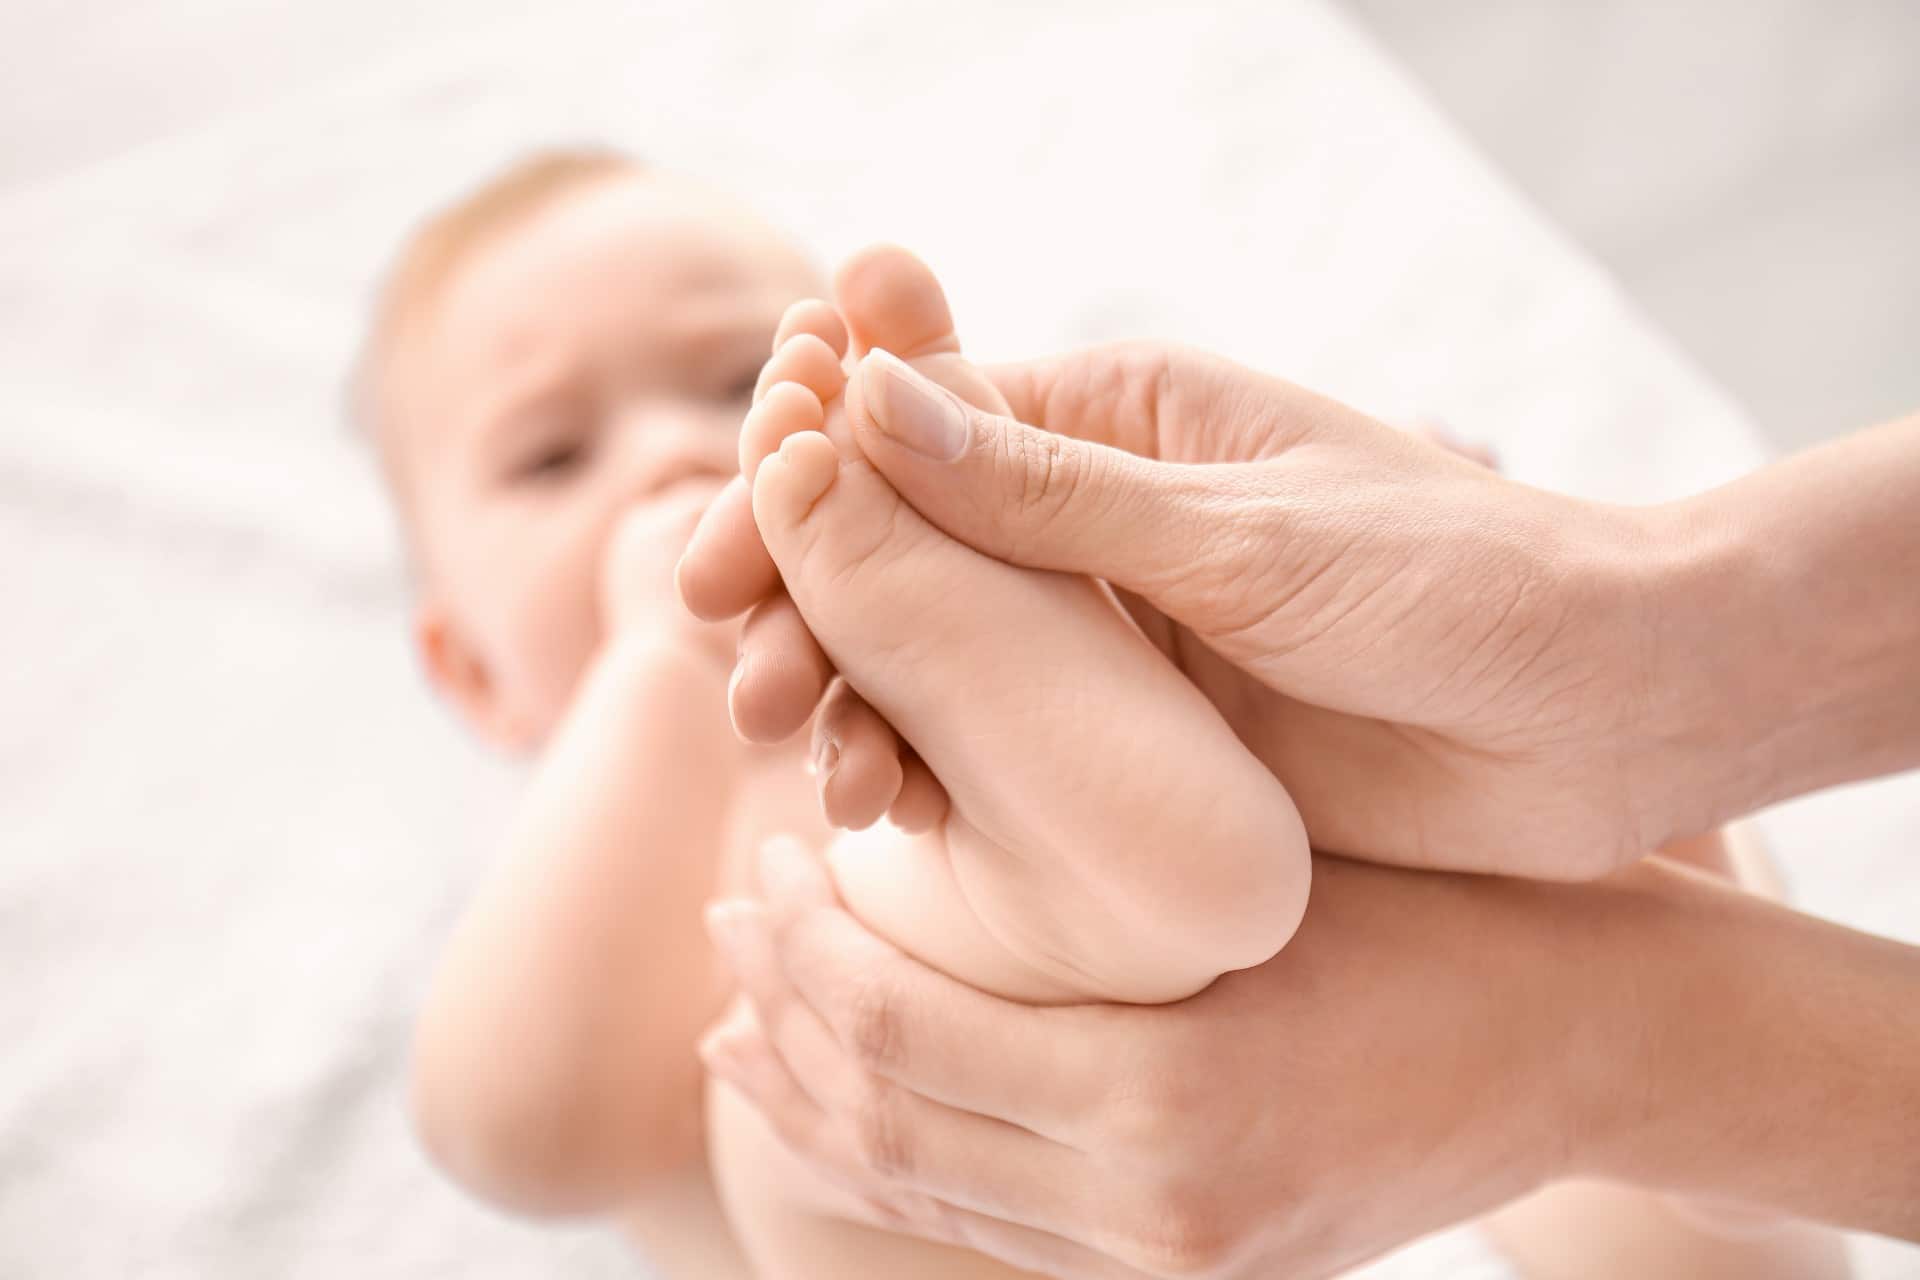 someone checking on a baby's foot